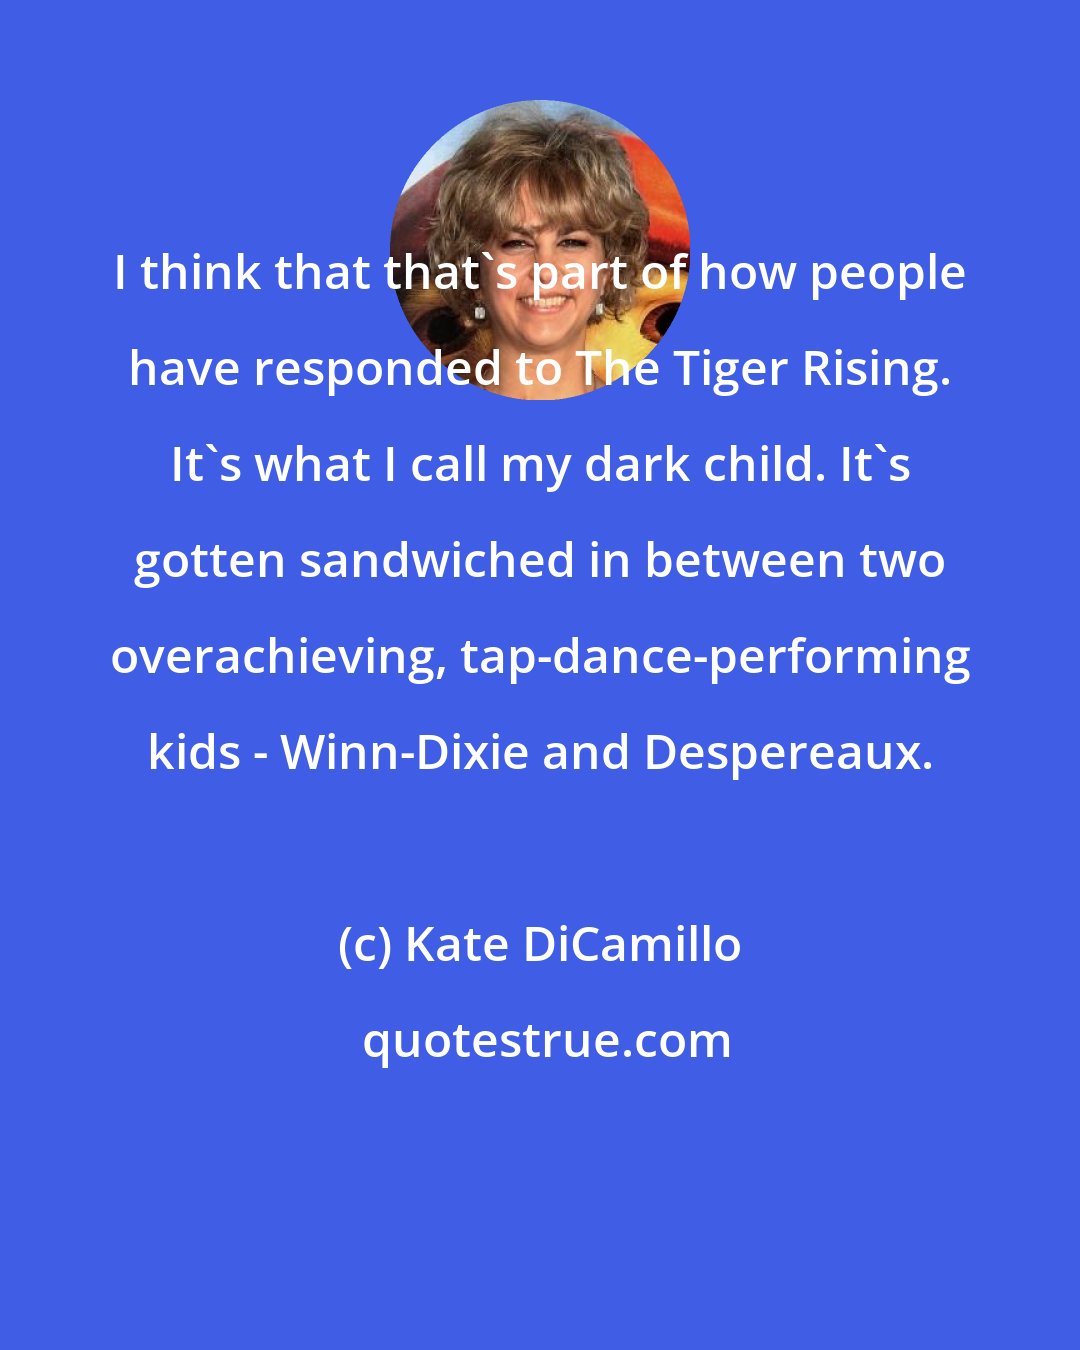 Kate DiCamillo: I think that that's part of how people have responded to The Tiger Rising. It's what I call my dark child. It's gotten sandwiched in between two overachieving, tap-dance-performing kids - Winn-Dixie and Despereaux.